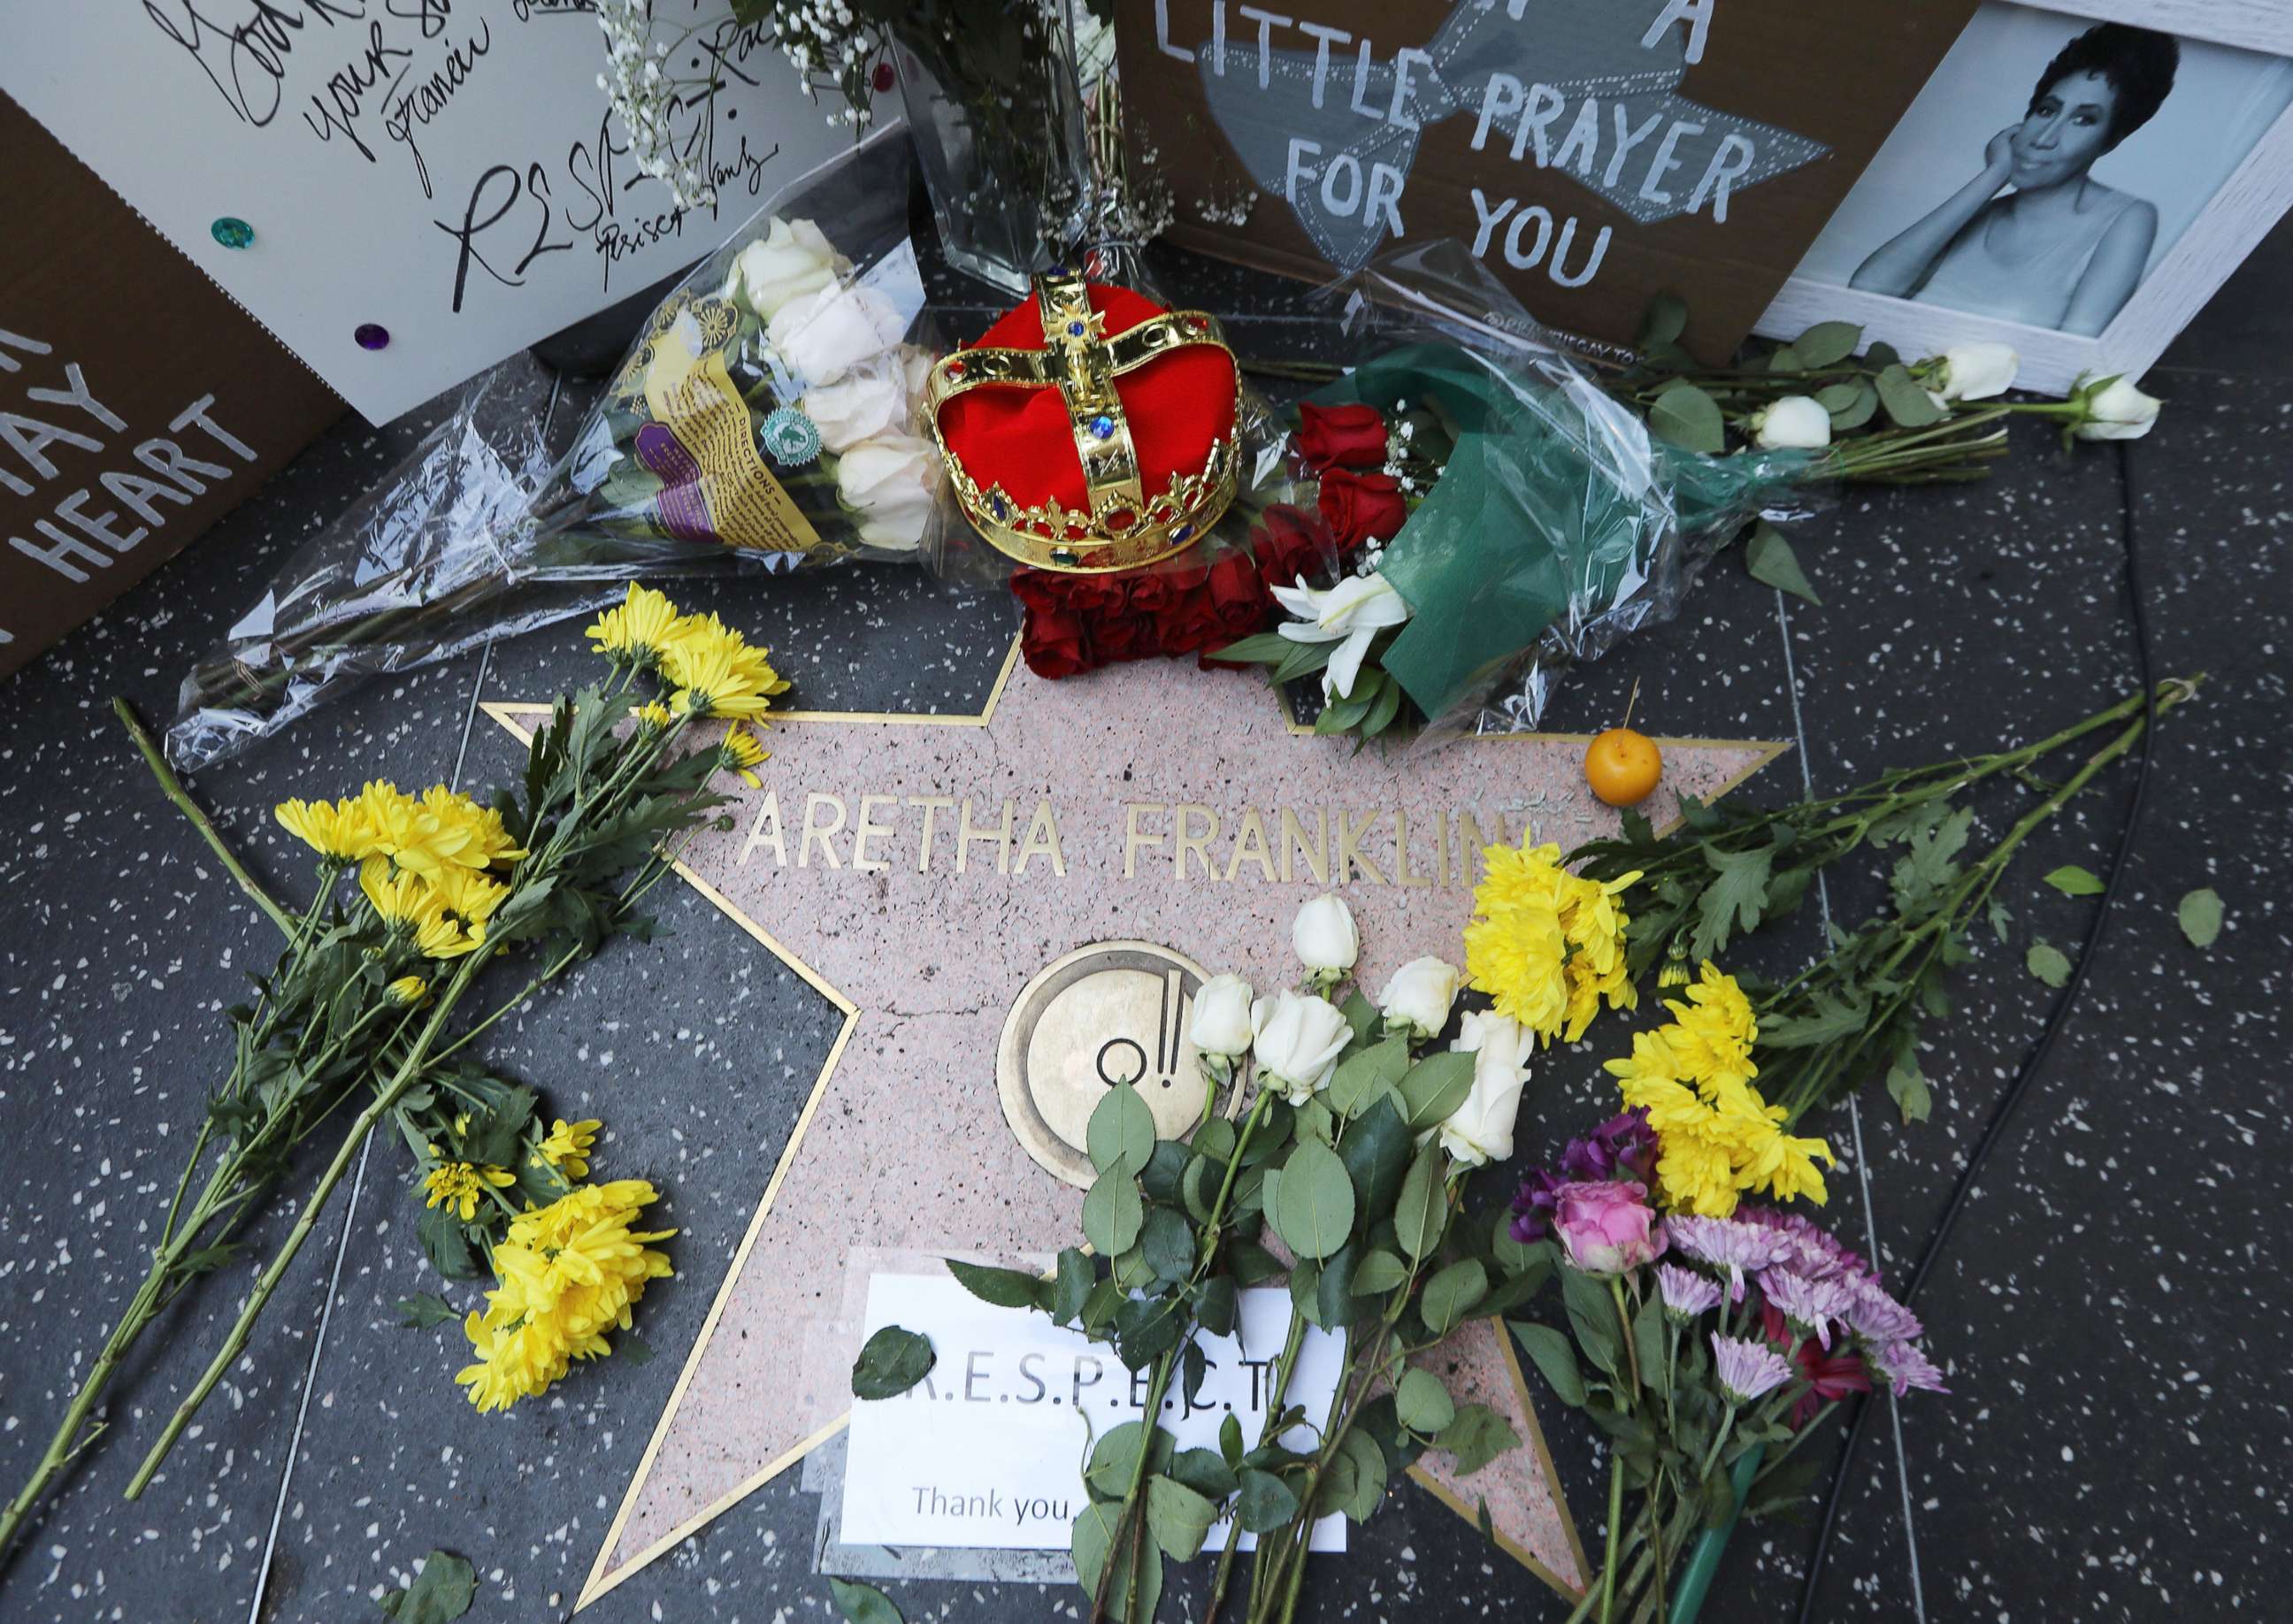 PHOTO: Flowers and mementos are left at Aretha Franklin's star on the Hollywood Walk of Fame, Aug. 16, 2018 in Hollywood, Calif. The legendary soul singer passed away today in Detroit from pancreatic cancer at age 76.